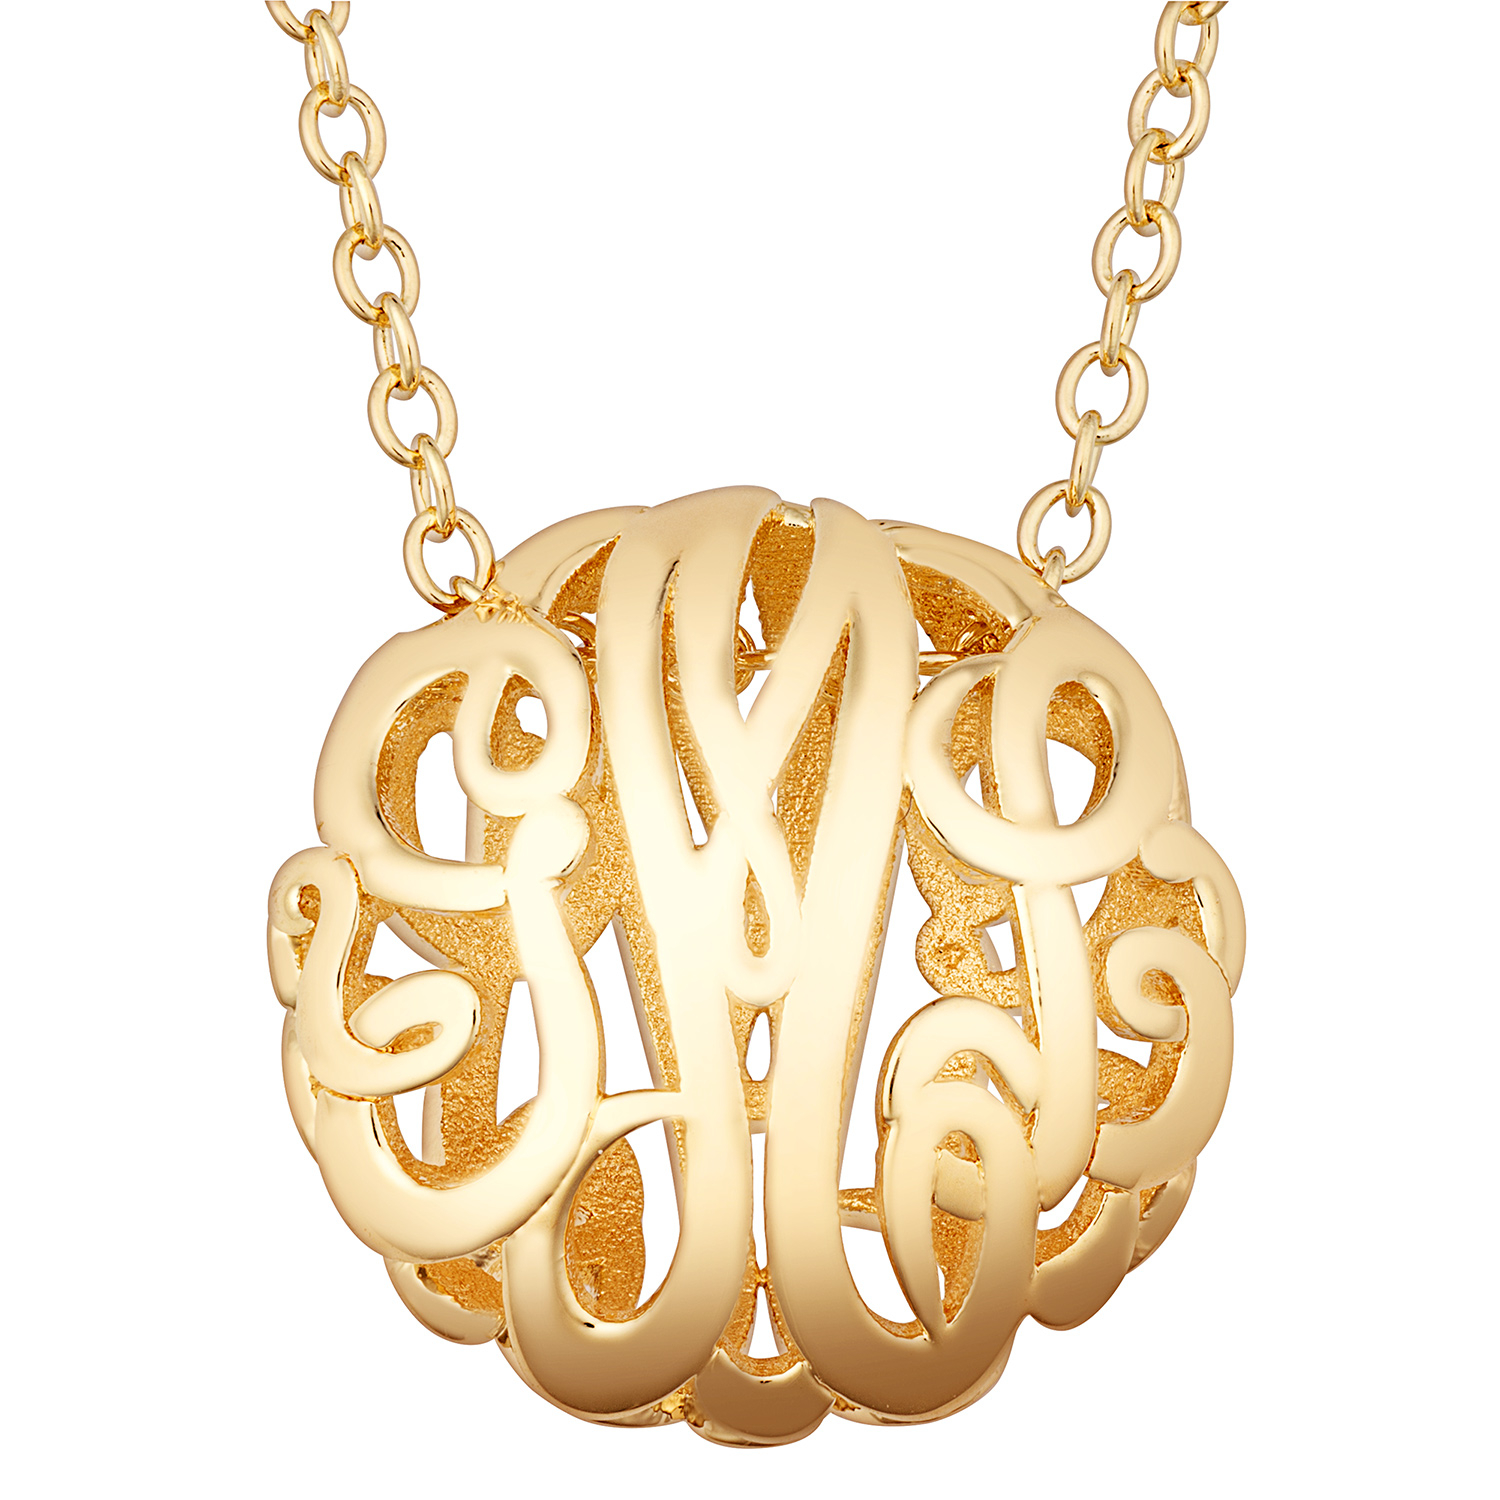 Double Sided 3-D 18x18mm Round Traditional Monogram Unframed Pendant